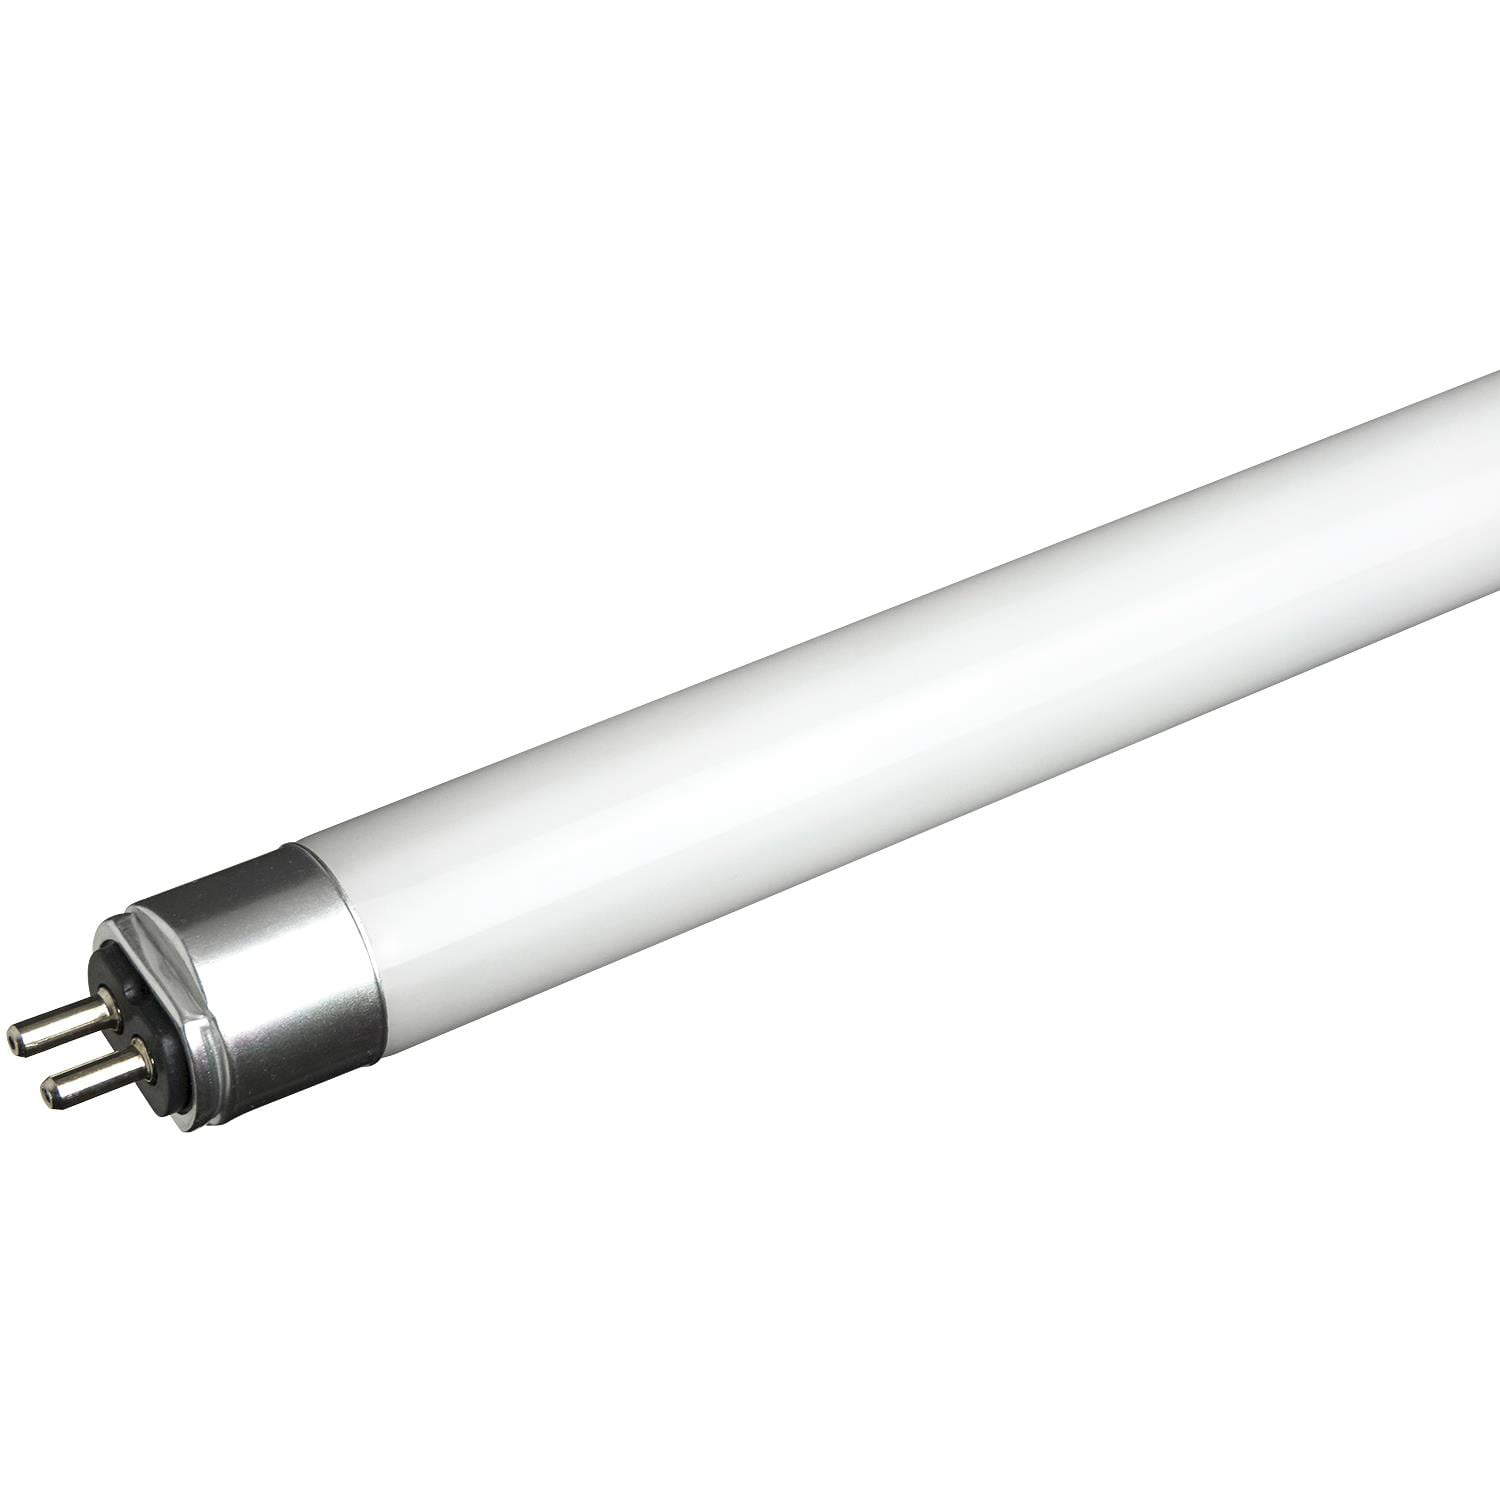 2" for Thread LED product White Connecting cable 63-303 Satco 